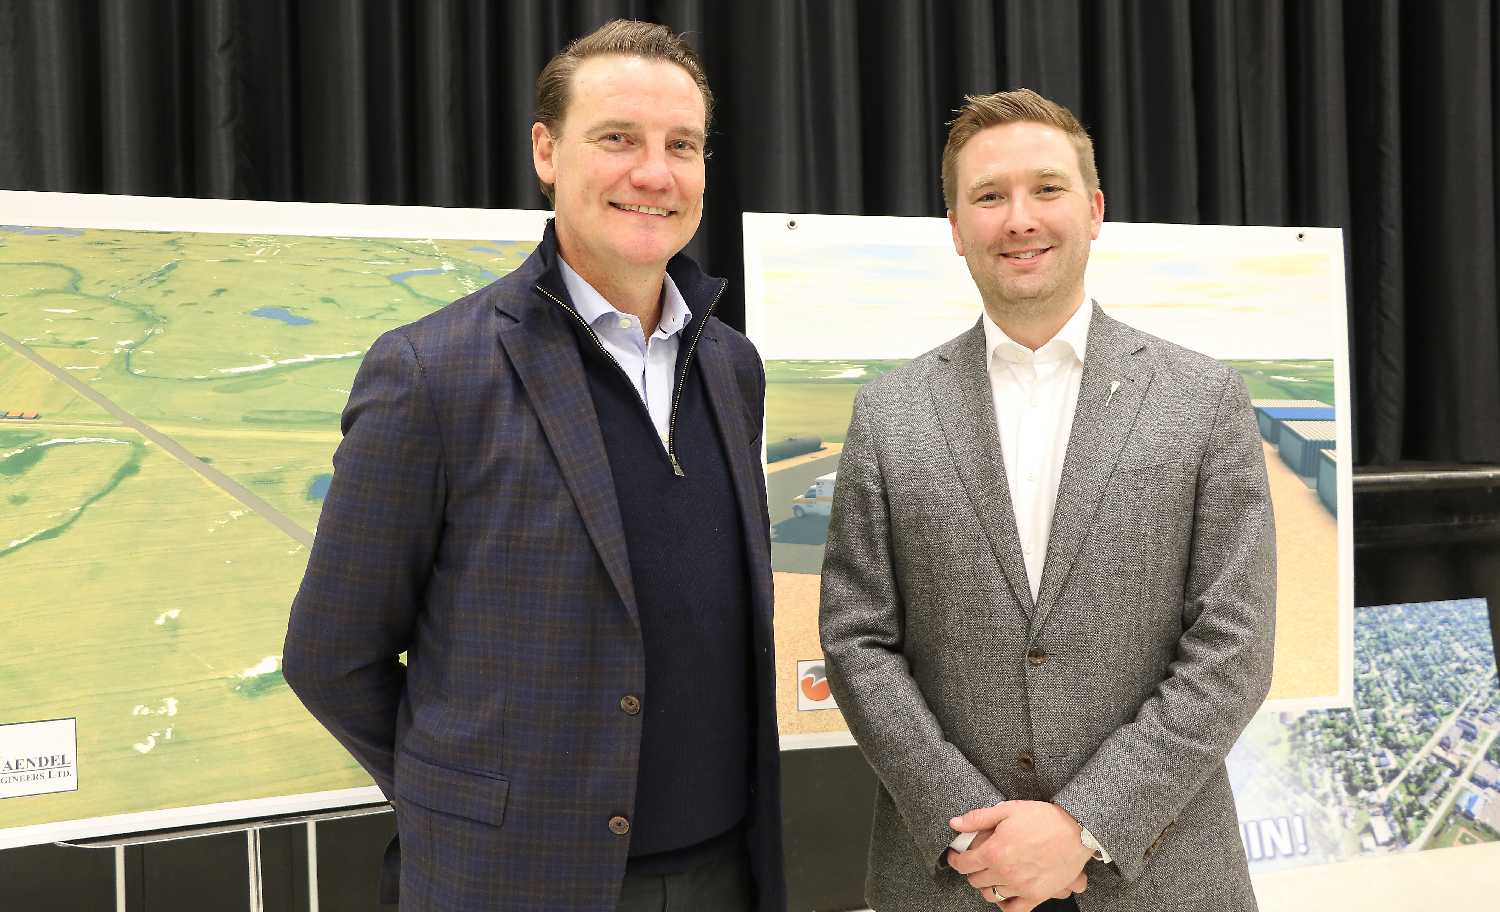 Saskatchewan Highways Minister Jeremy Cockrill and Nutrien Executive Vice President and President, Potash Chris Reynolds both announced new funding for Moosomin's airport expansion project Wednesday